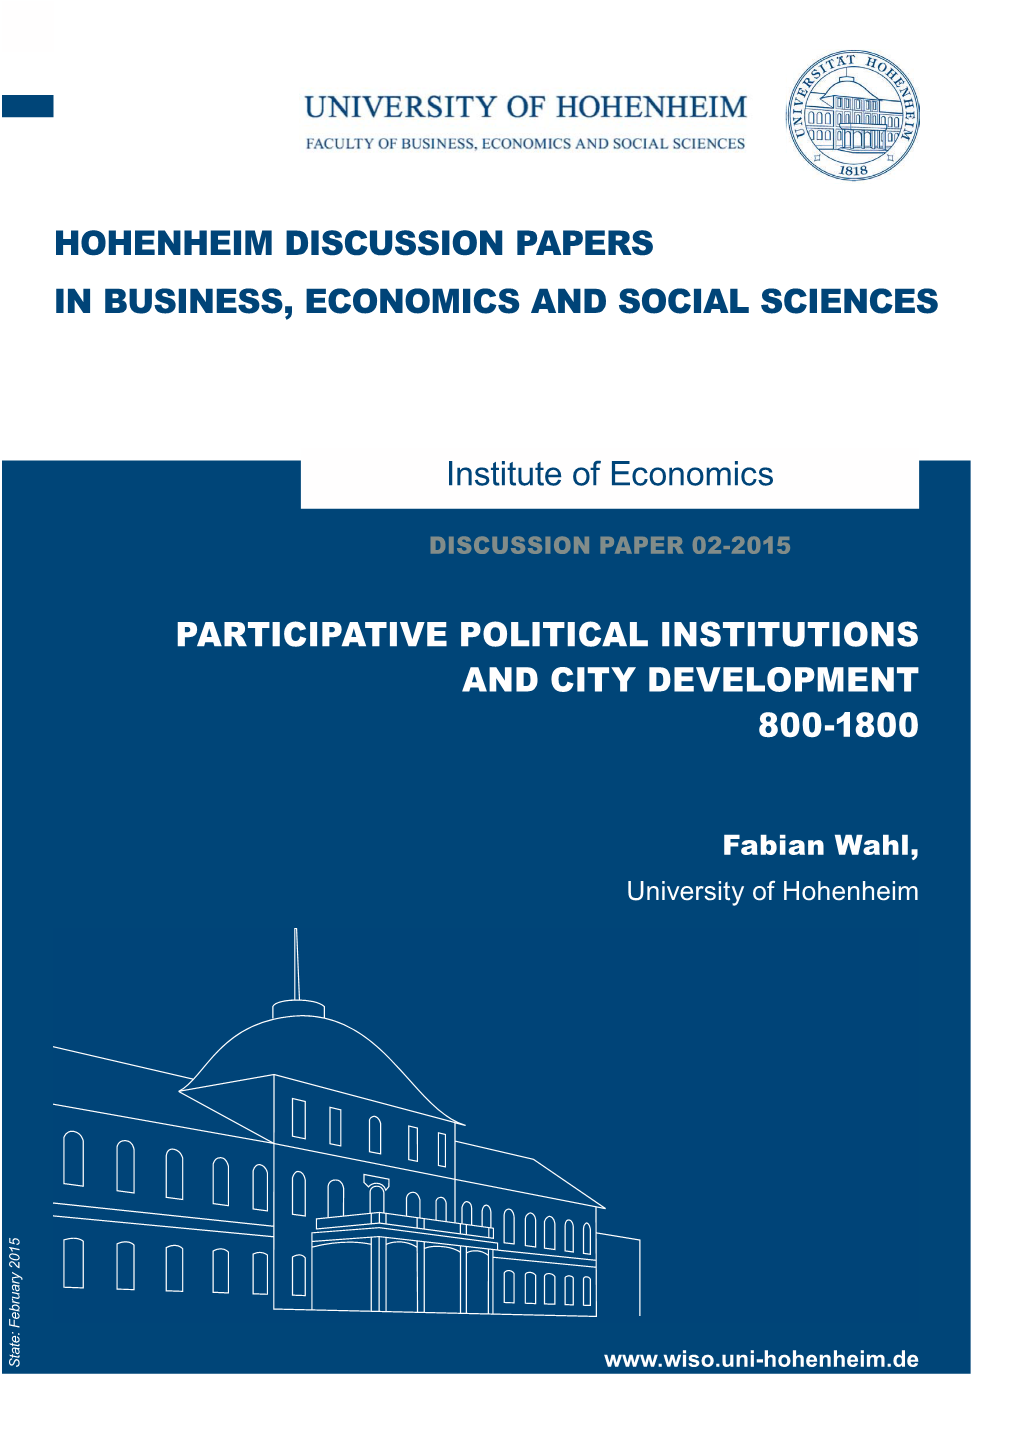 Participative Political Institutions and City Development 800-1800